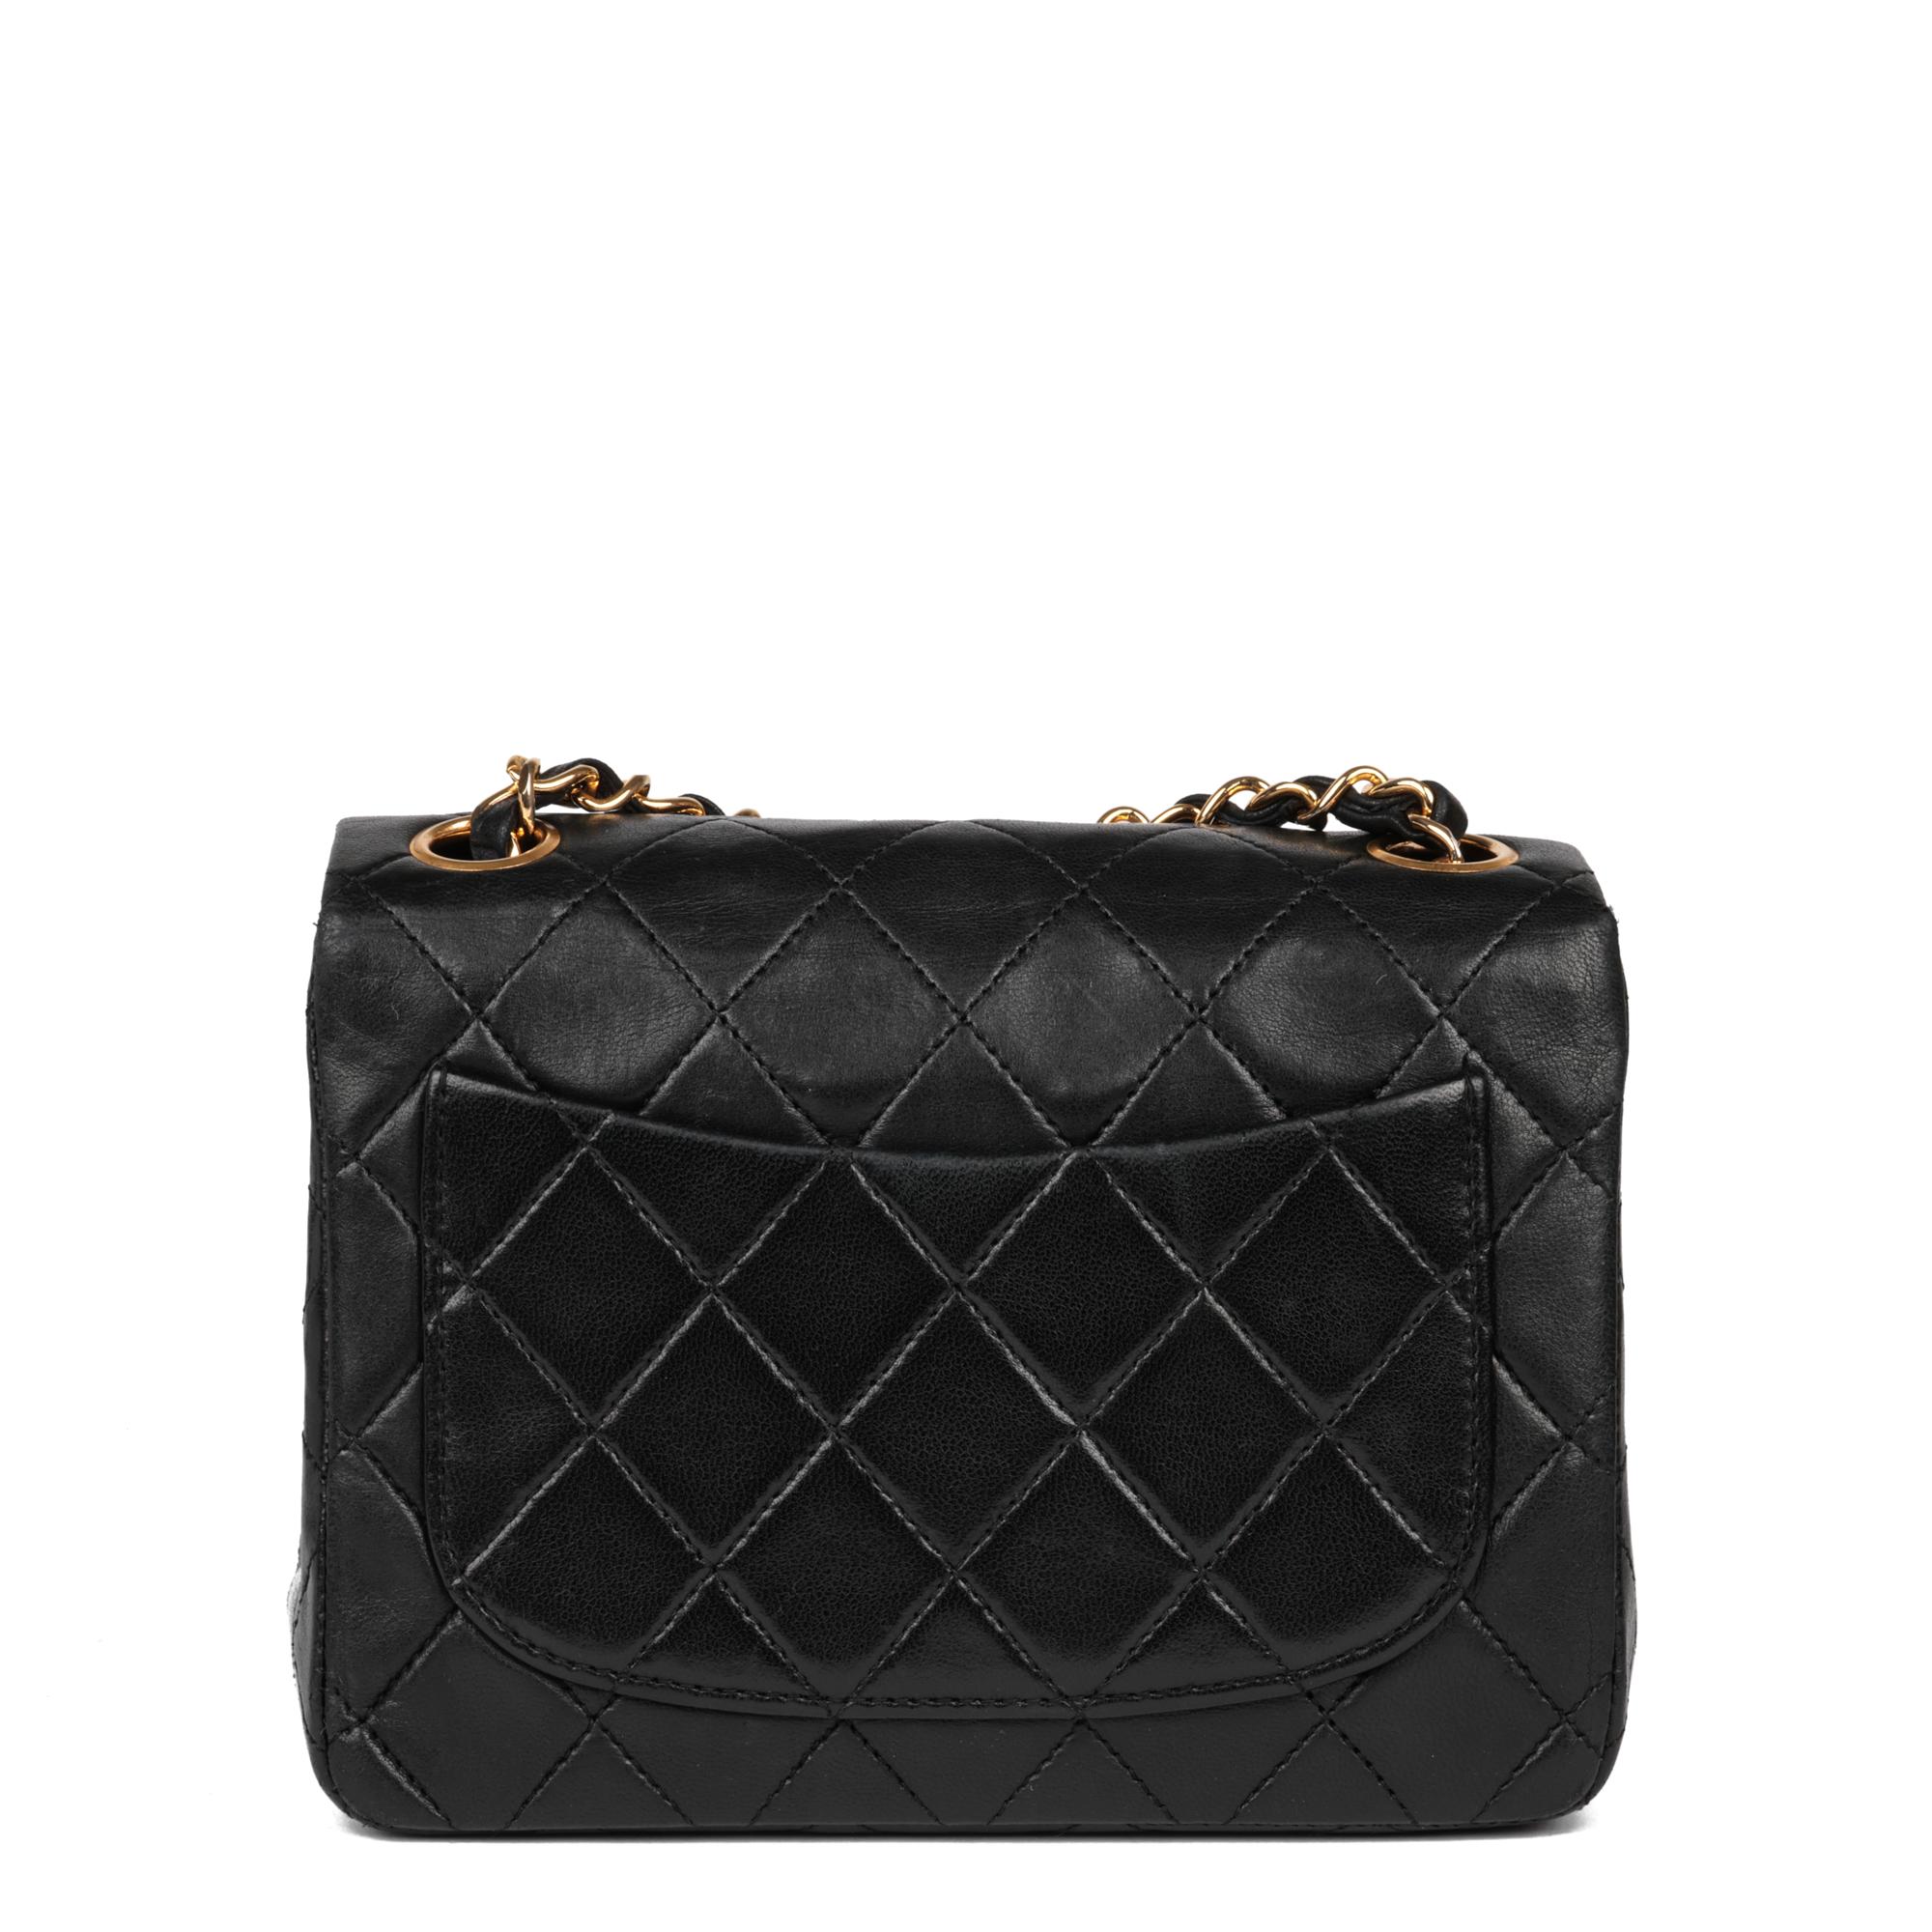 CHANEL Black Quilted Lambskin Vintage Square Mini Flap Bag 1